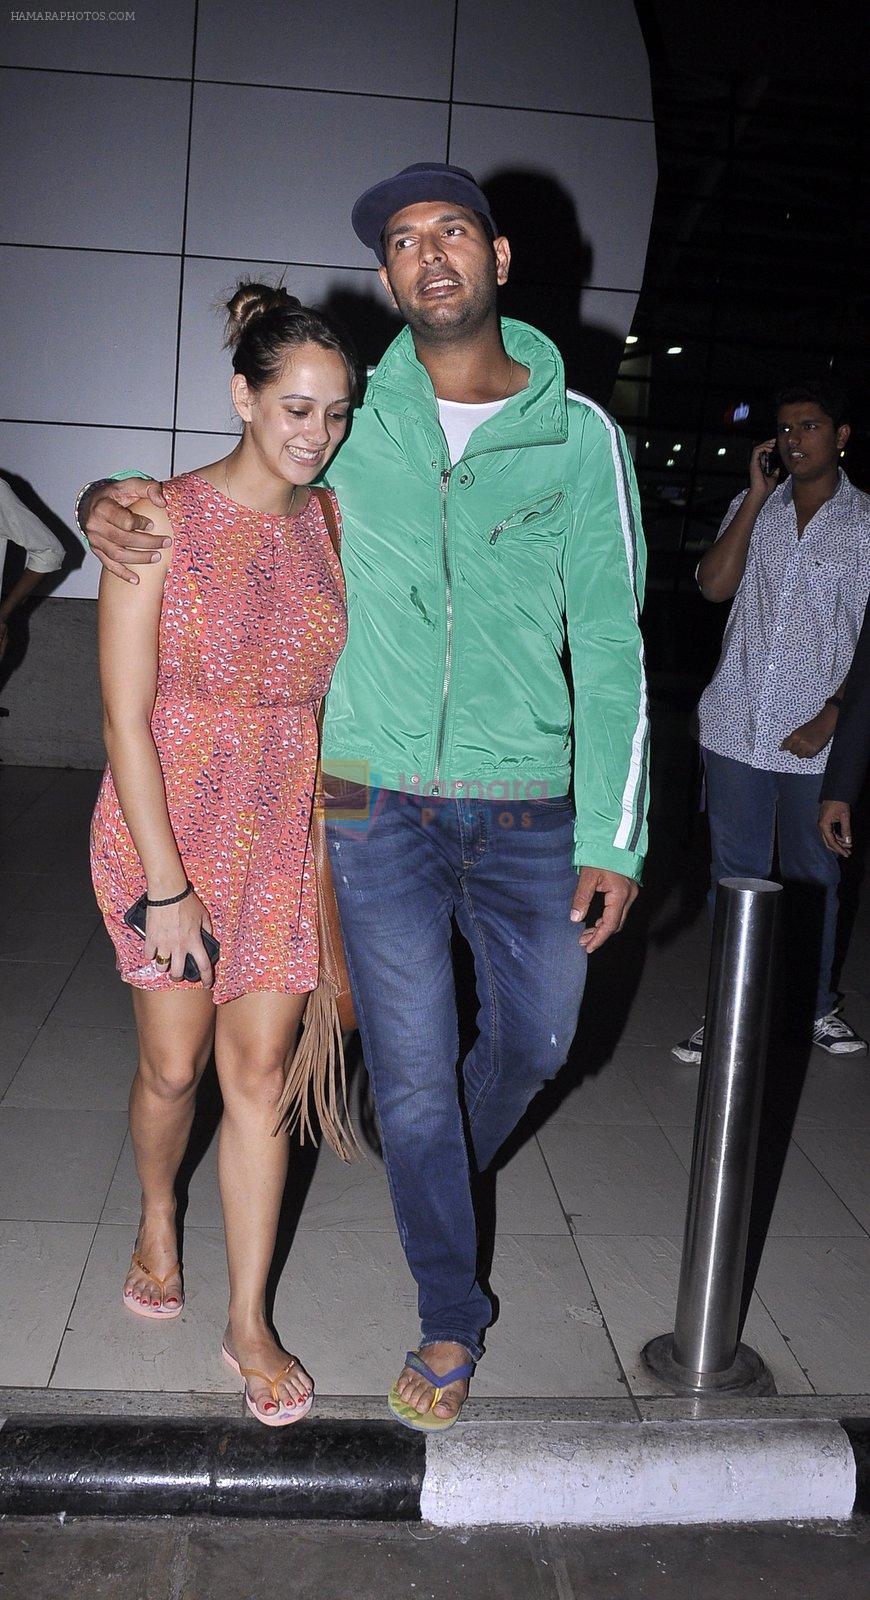 Yuvraj Singh and Hazel Keech post their engagement snapped at the airport on 17th Nov 2015